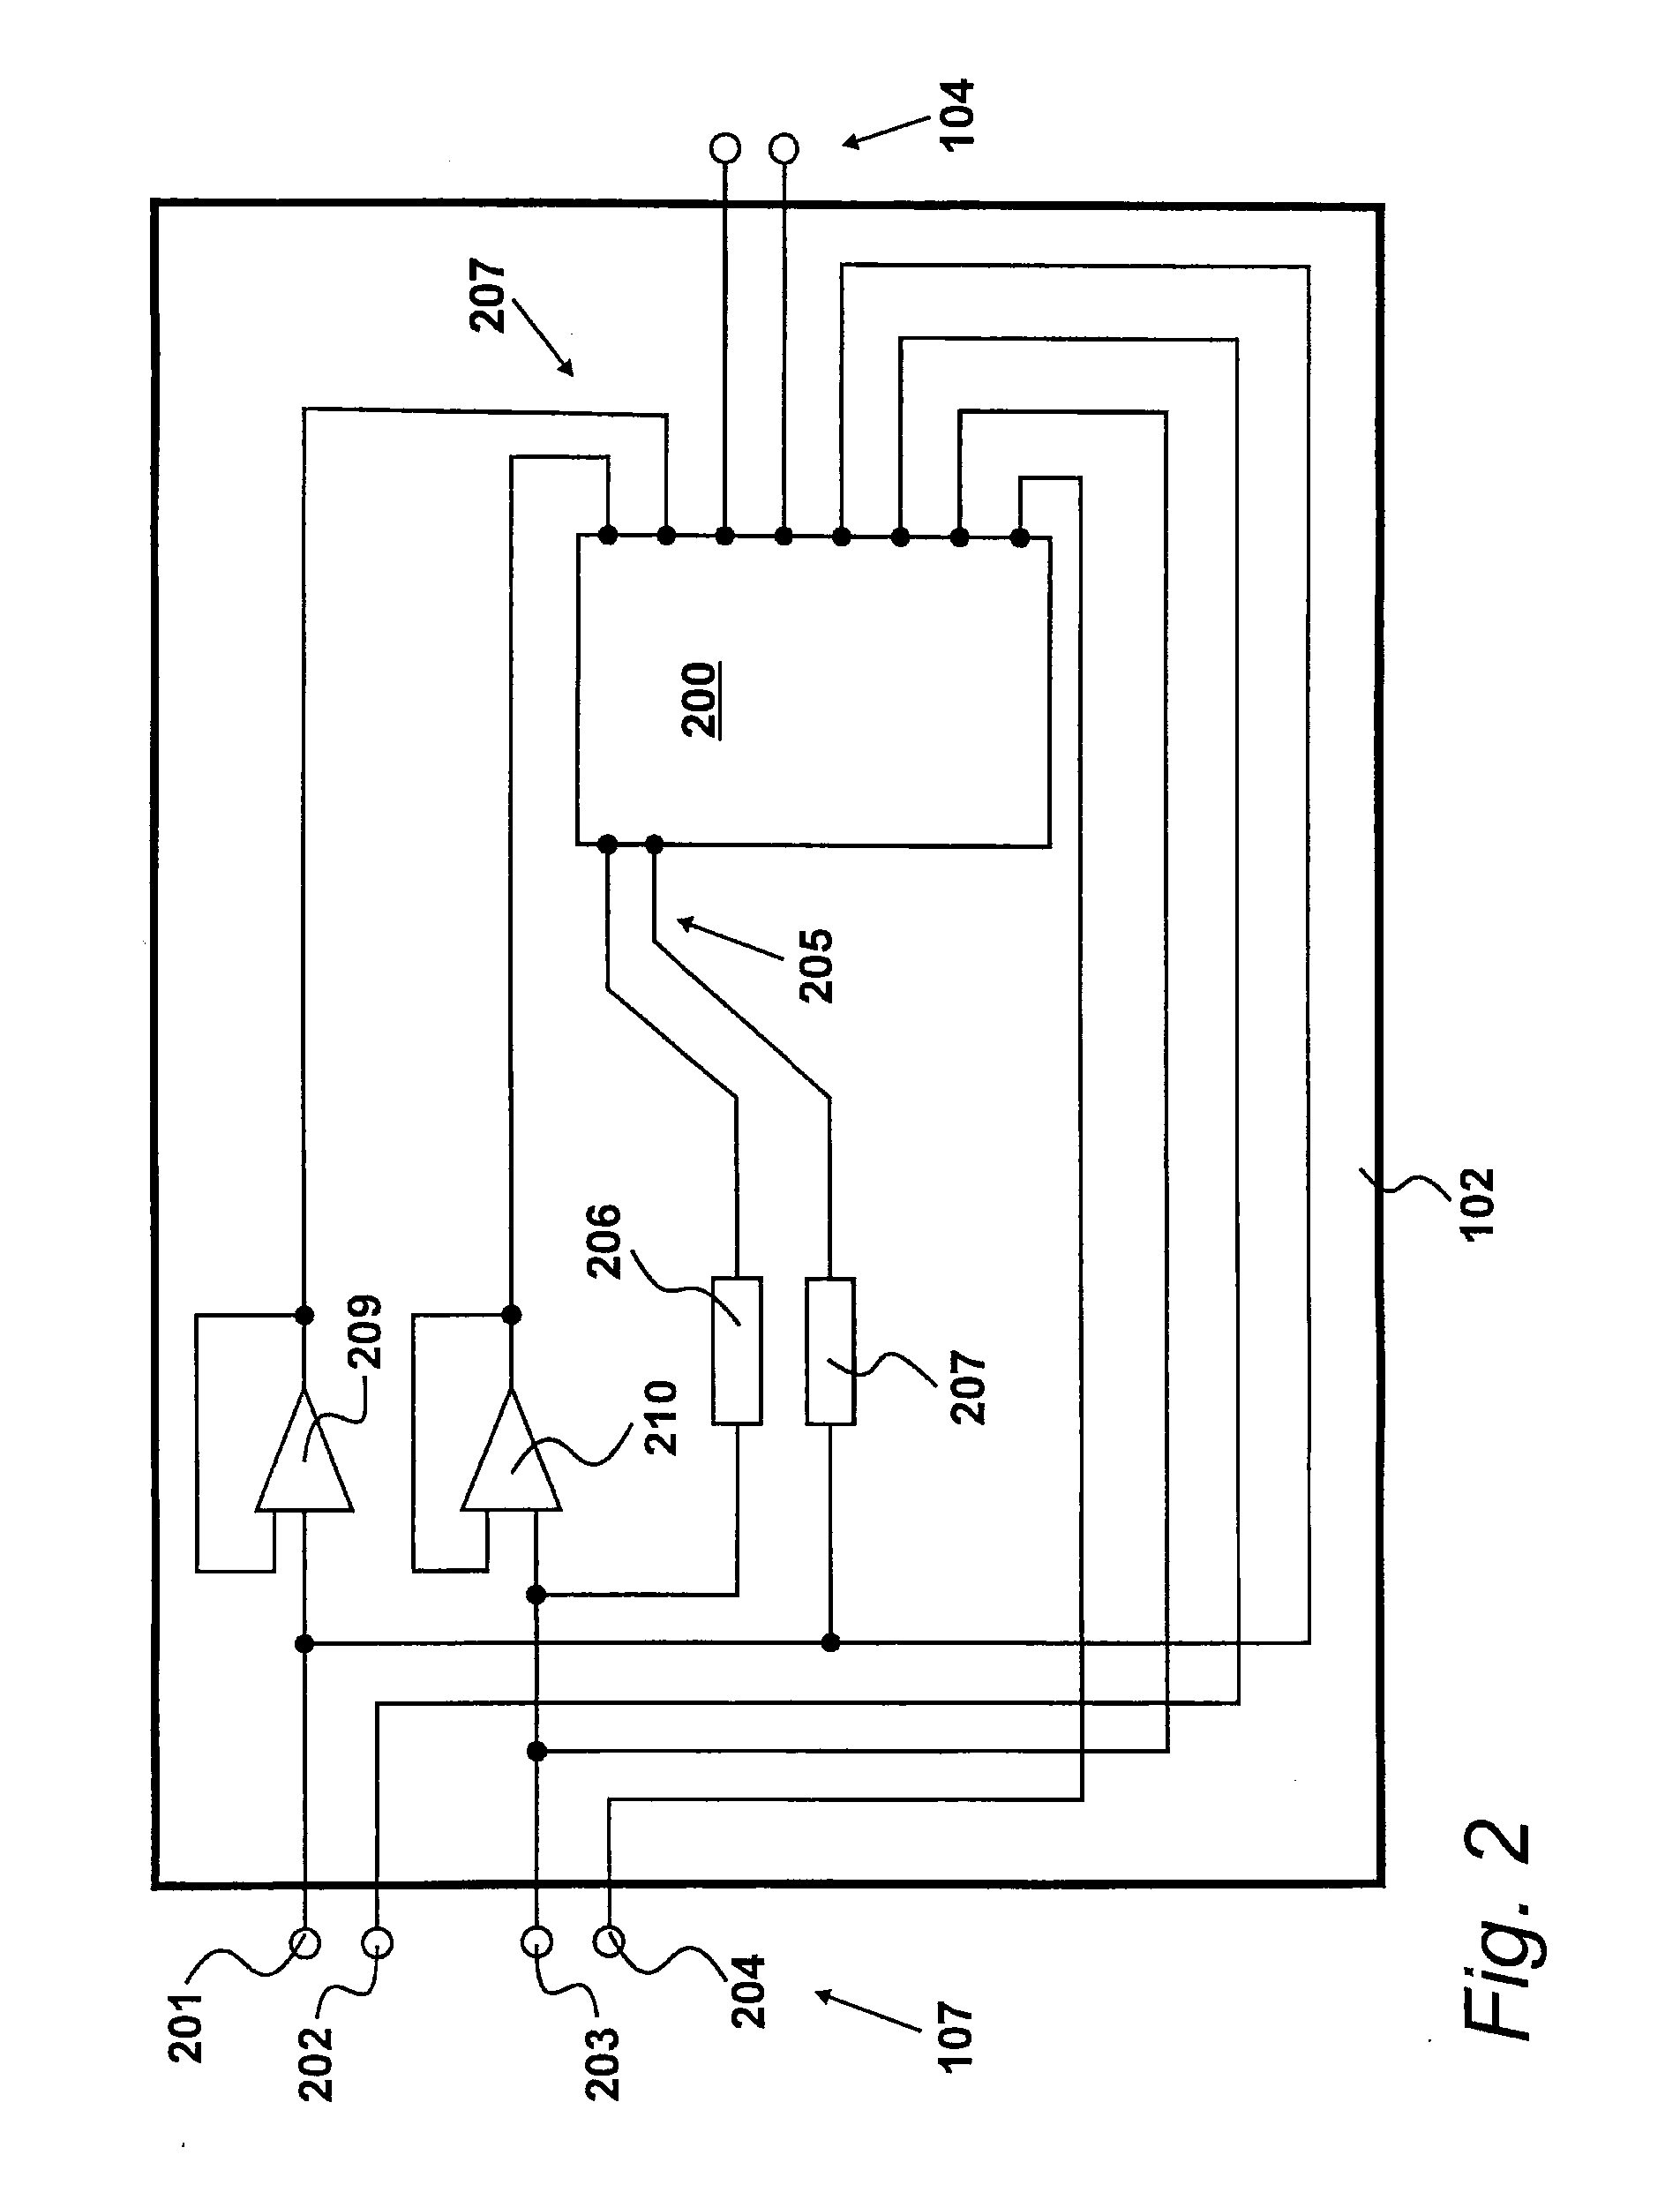 Interfacing an electronic device to a controller